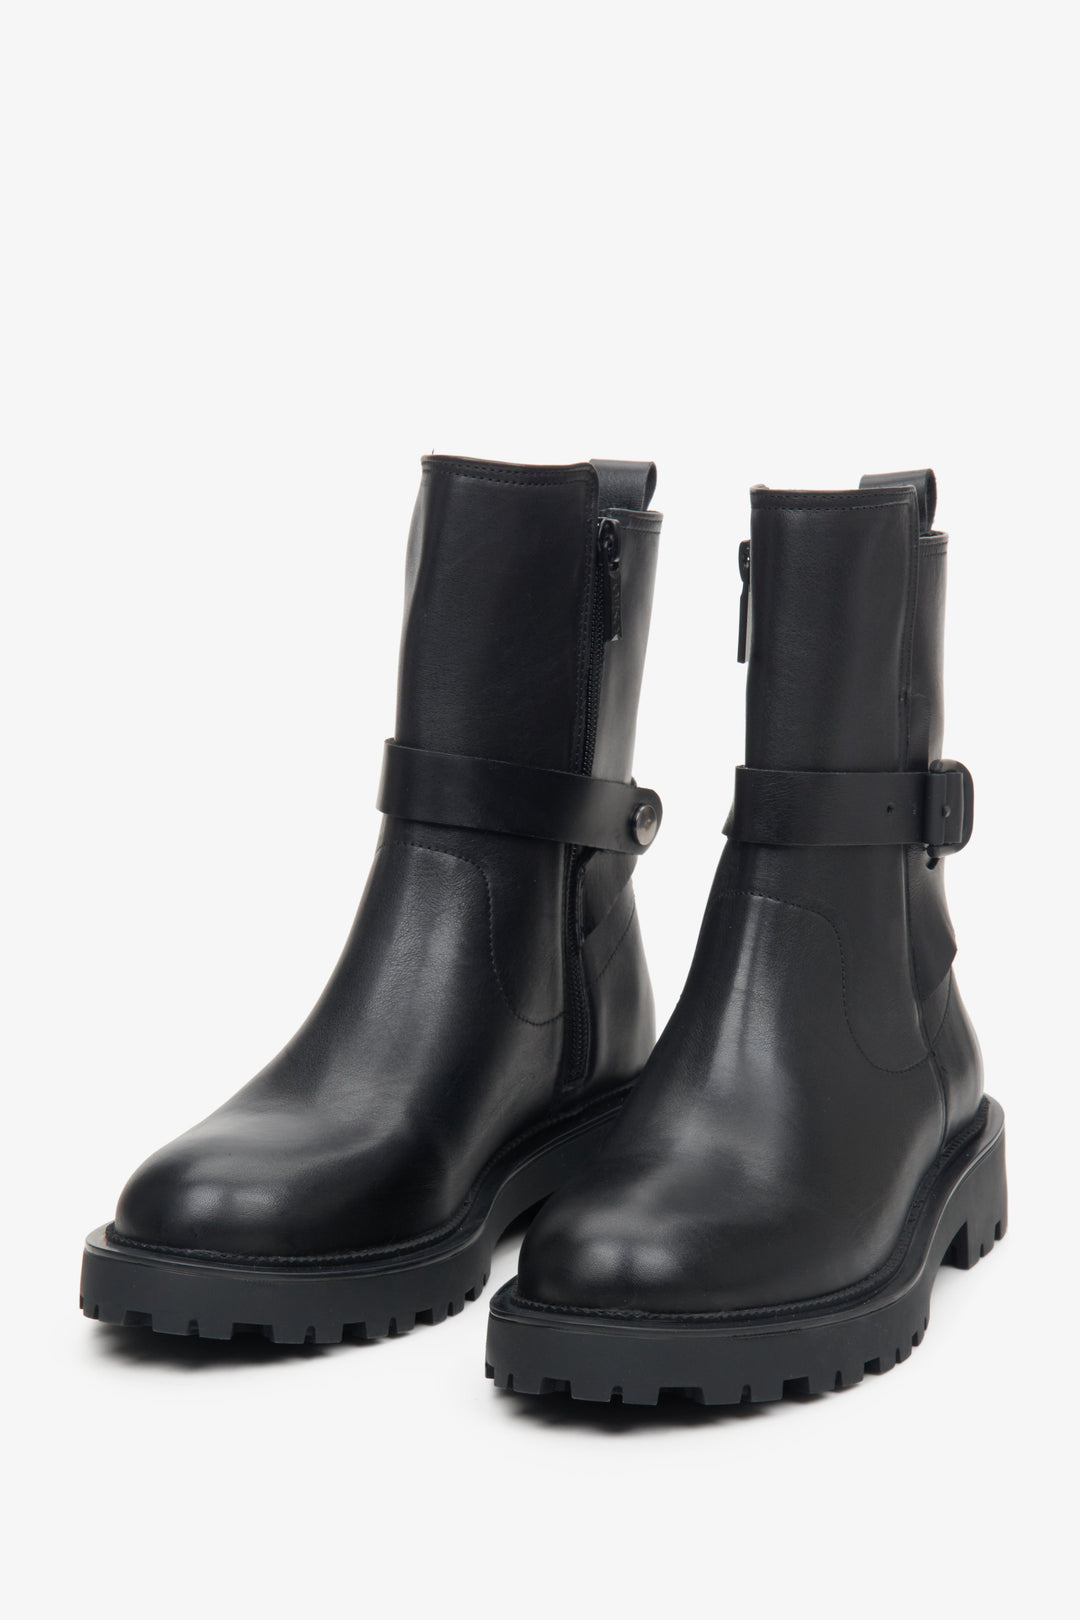 Women's black Estro leather ankle boots - close-up on the toe and front of the model.